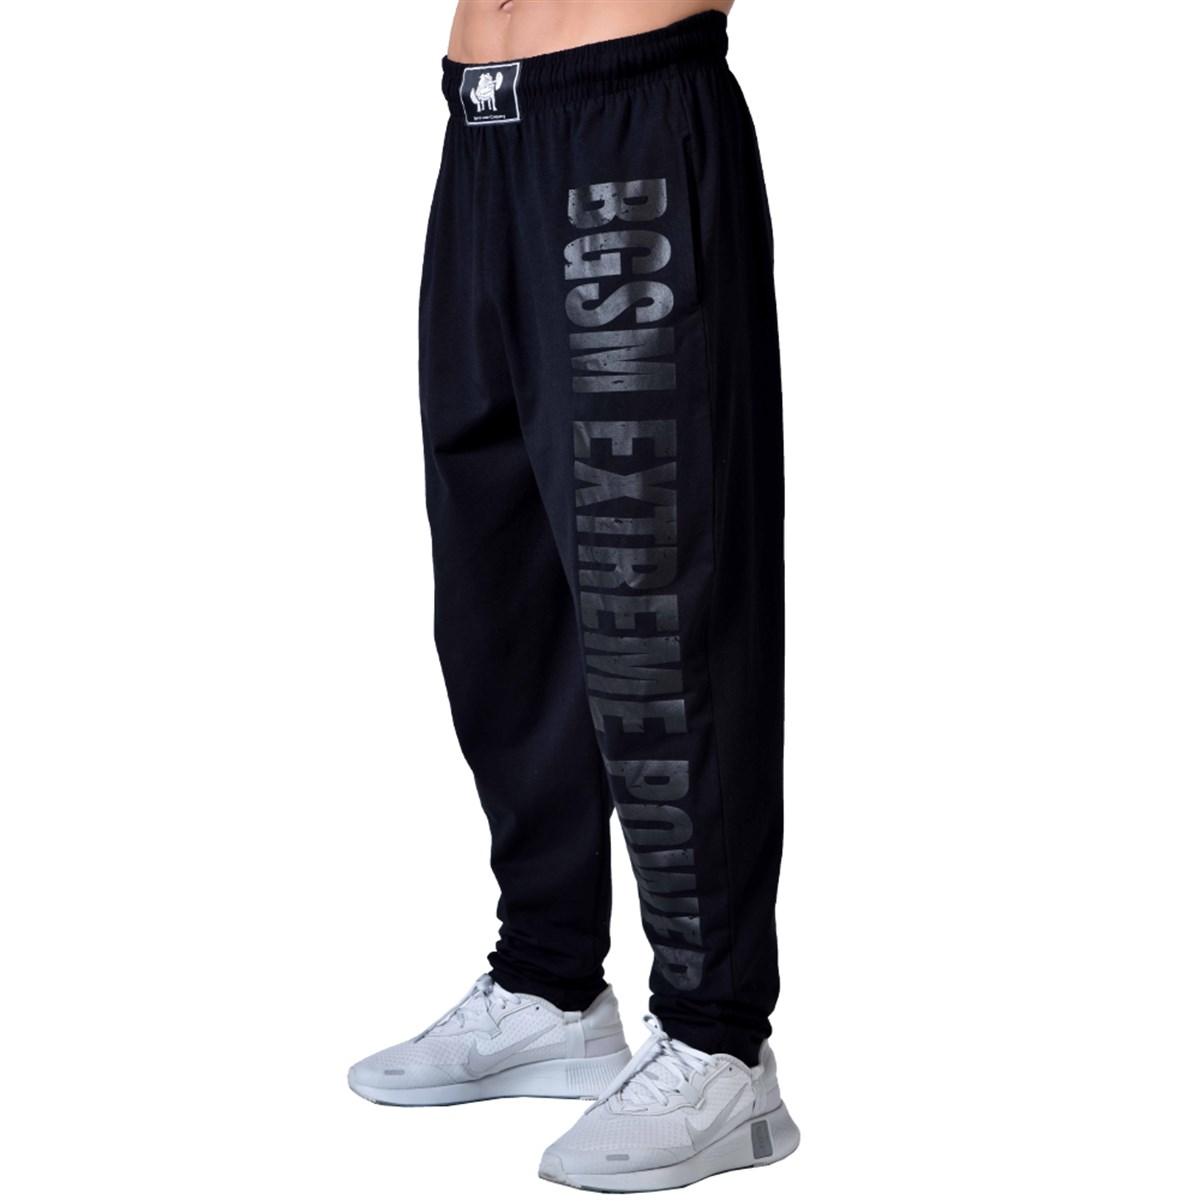 F500 Baggy Gym Pants - Workout Pants from Best Form Fitness Gear